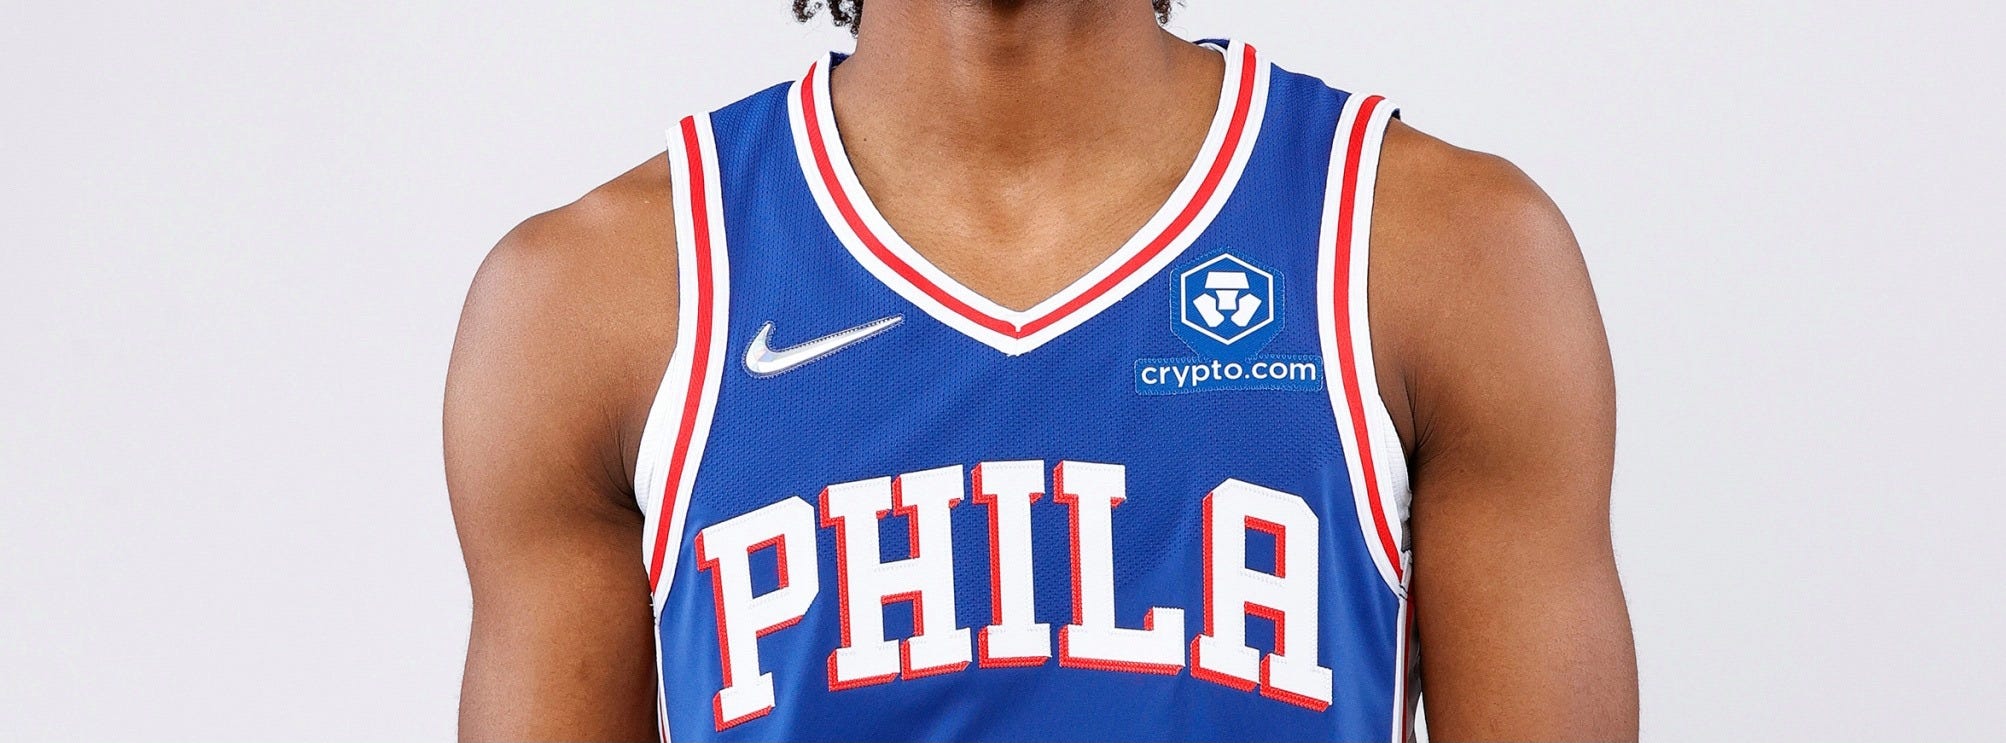 Nike finally admits the new NBA jerseys are a problem, and they're